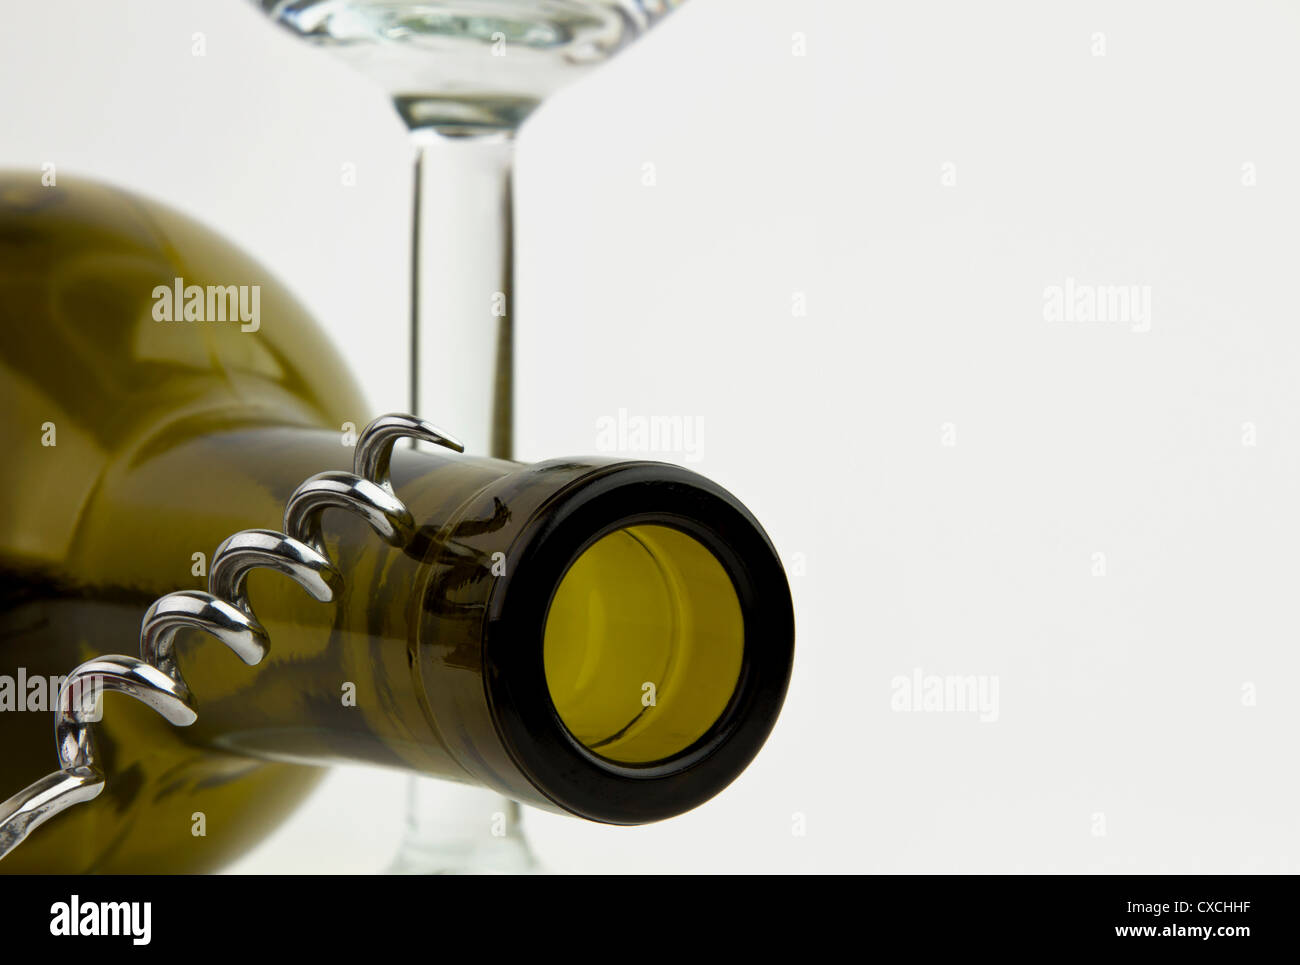 Empty green glass wine bottle with stem wineglass and corkscrew. Stock Photo